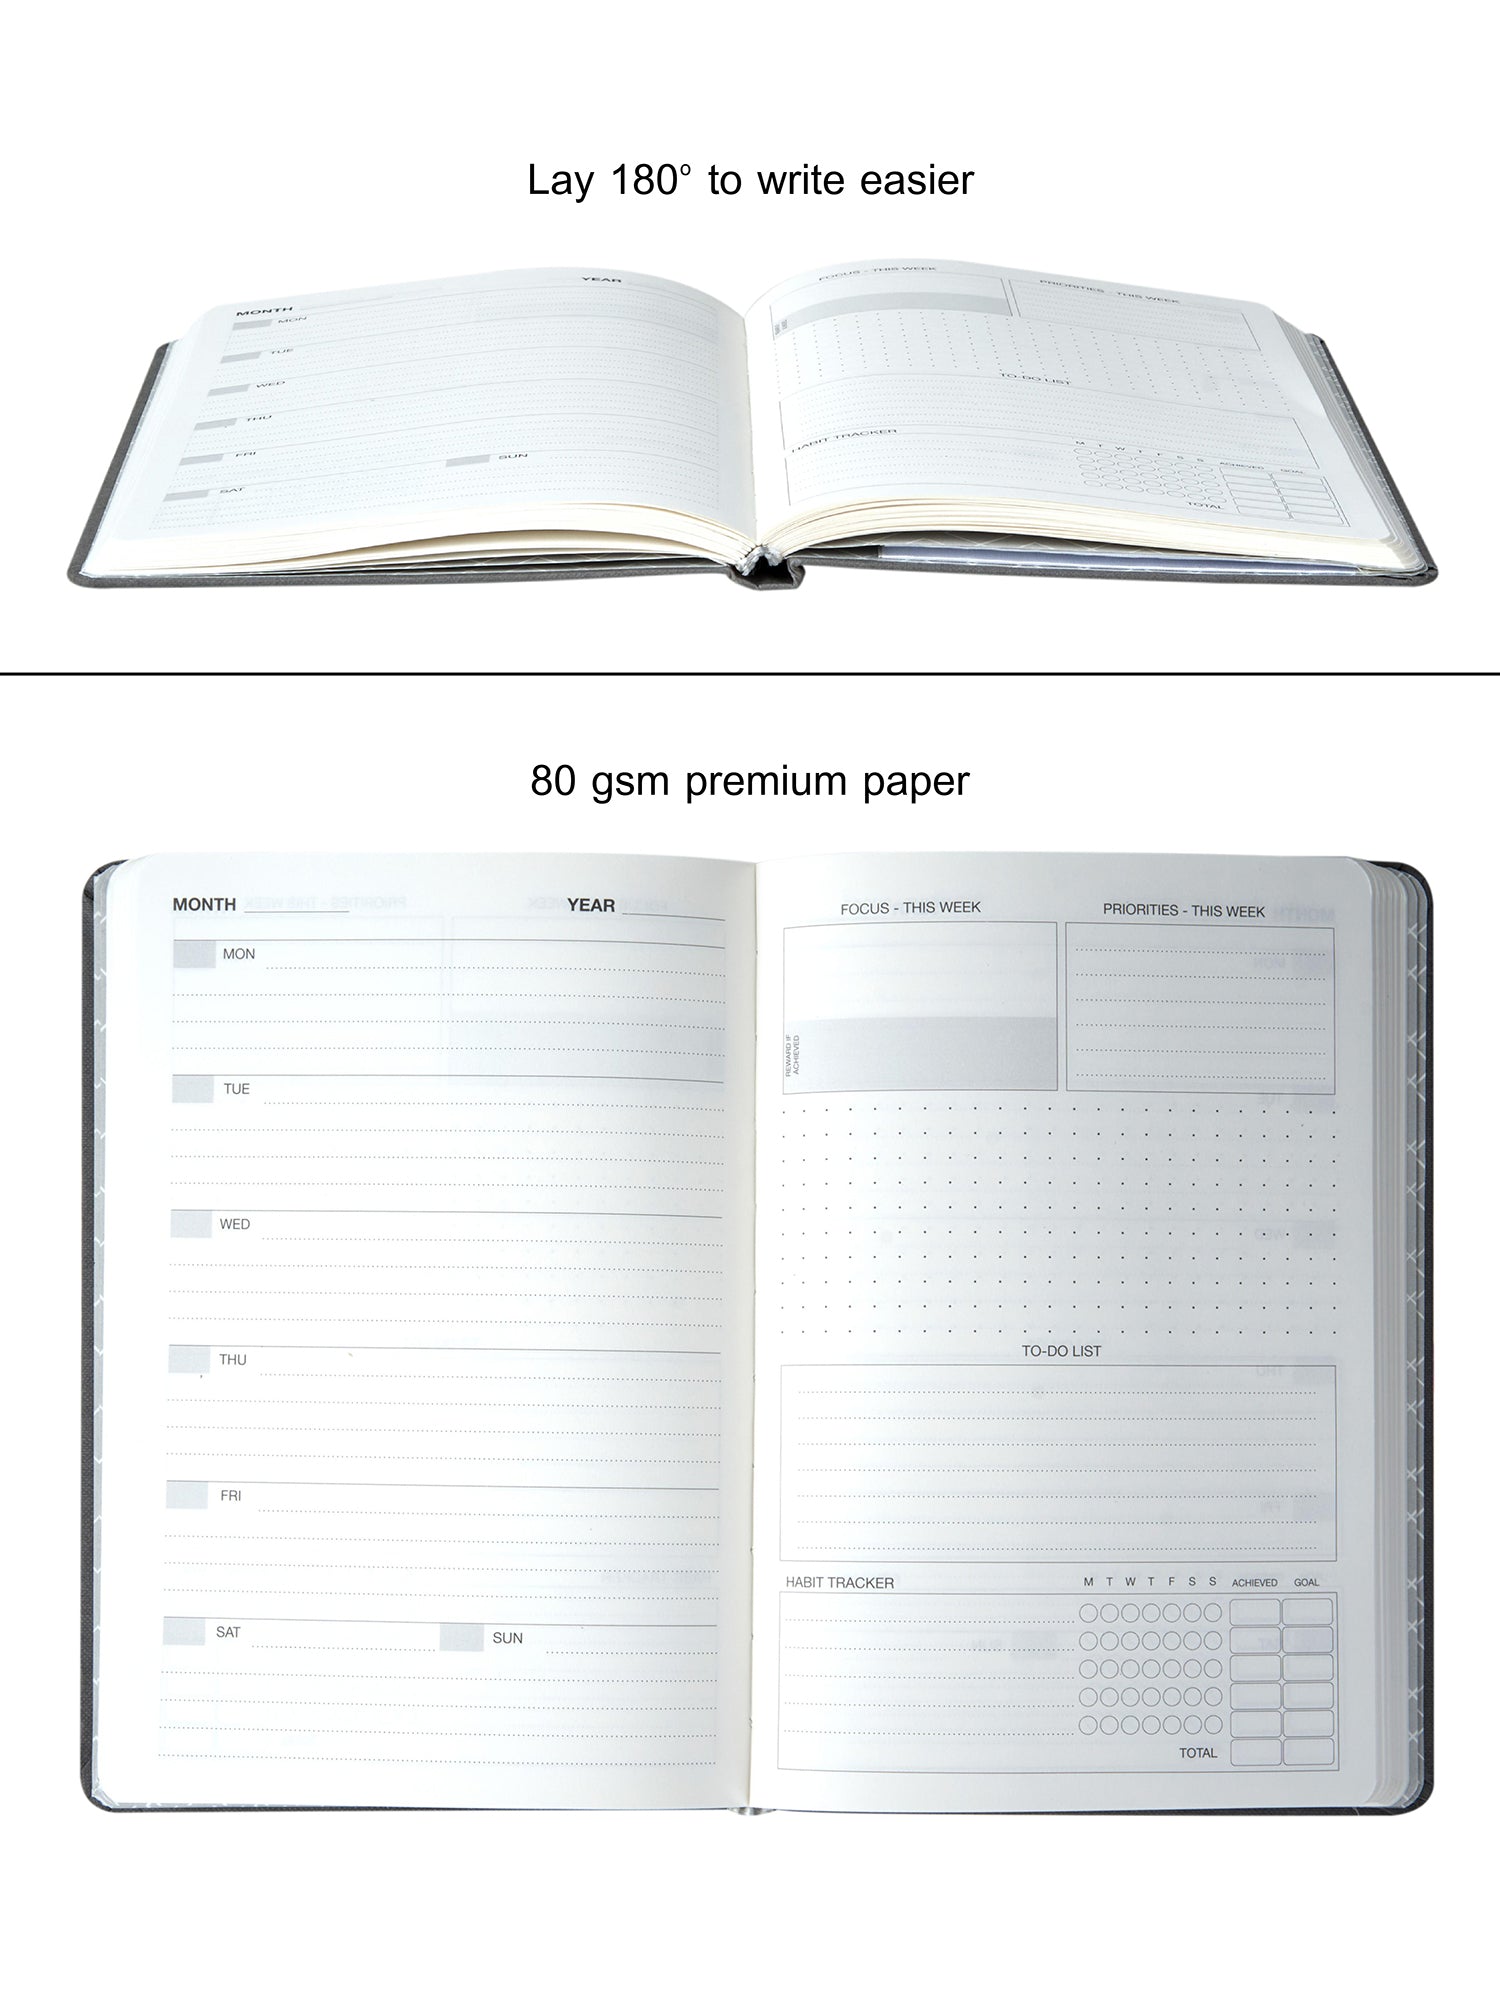 Personalized Undated Organise- It Hardbound A5 Weekly Planner (Black)